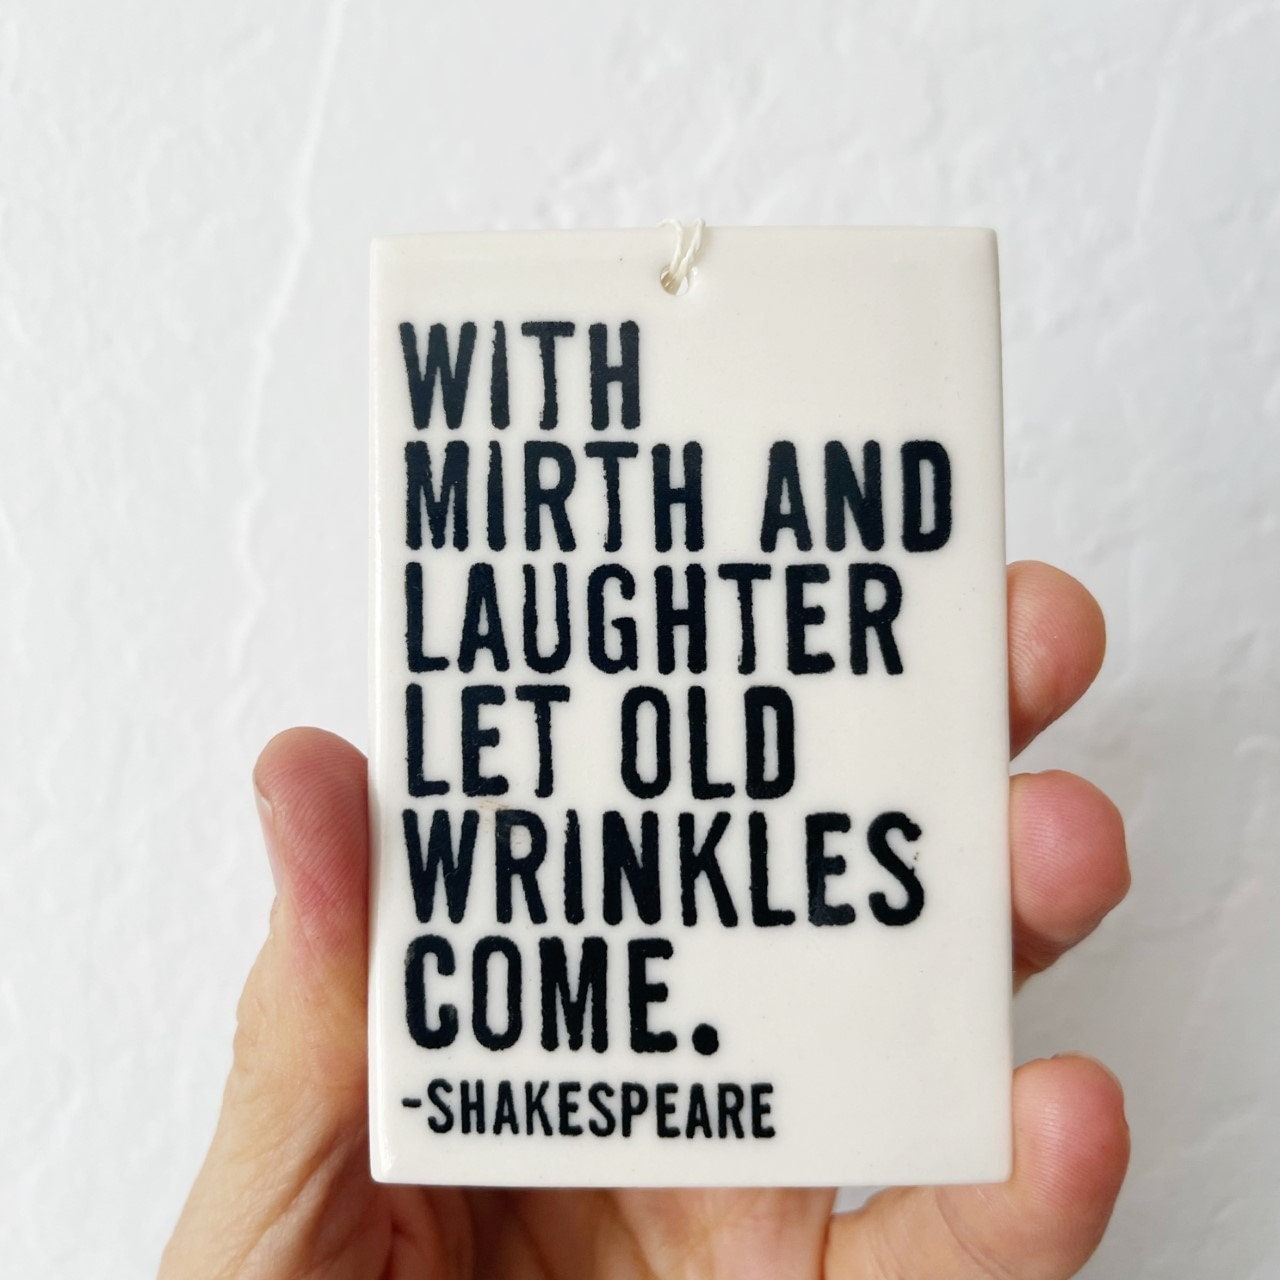 shakespeare quote | ceramic wall tag | ceramic wall art | screenprinted ceramics | wrinkles | with mirth and laughter | home decor